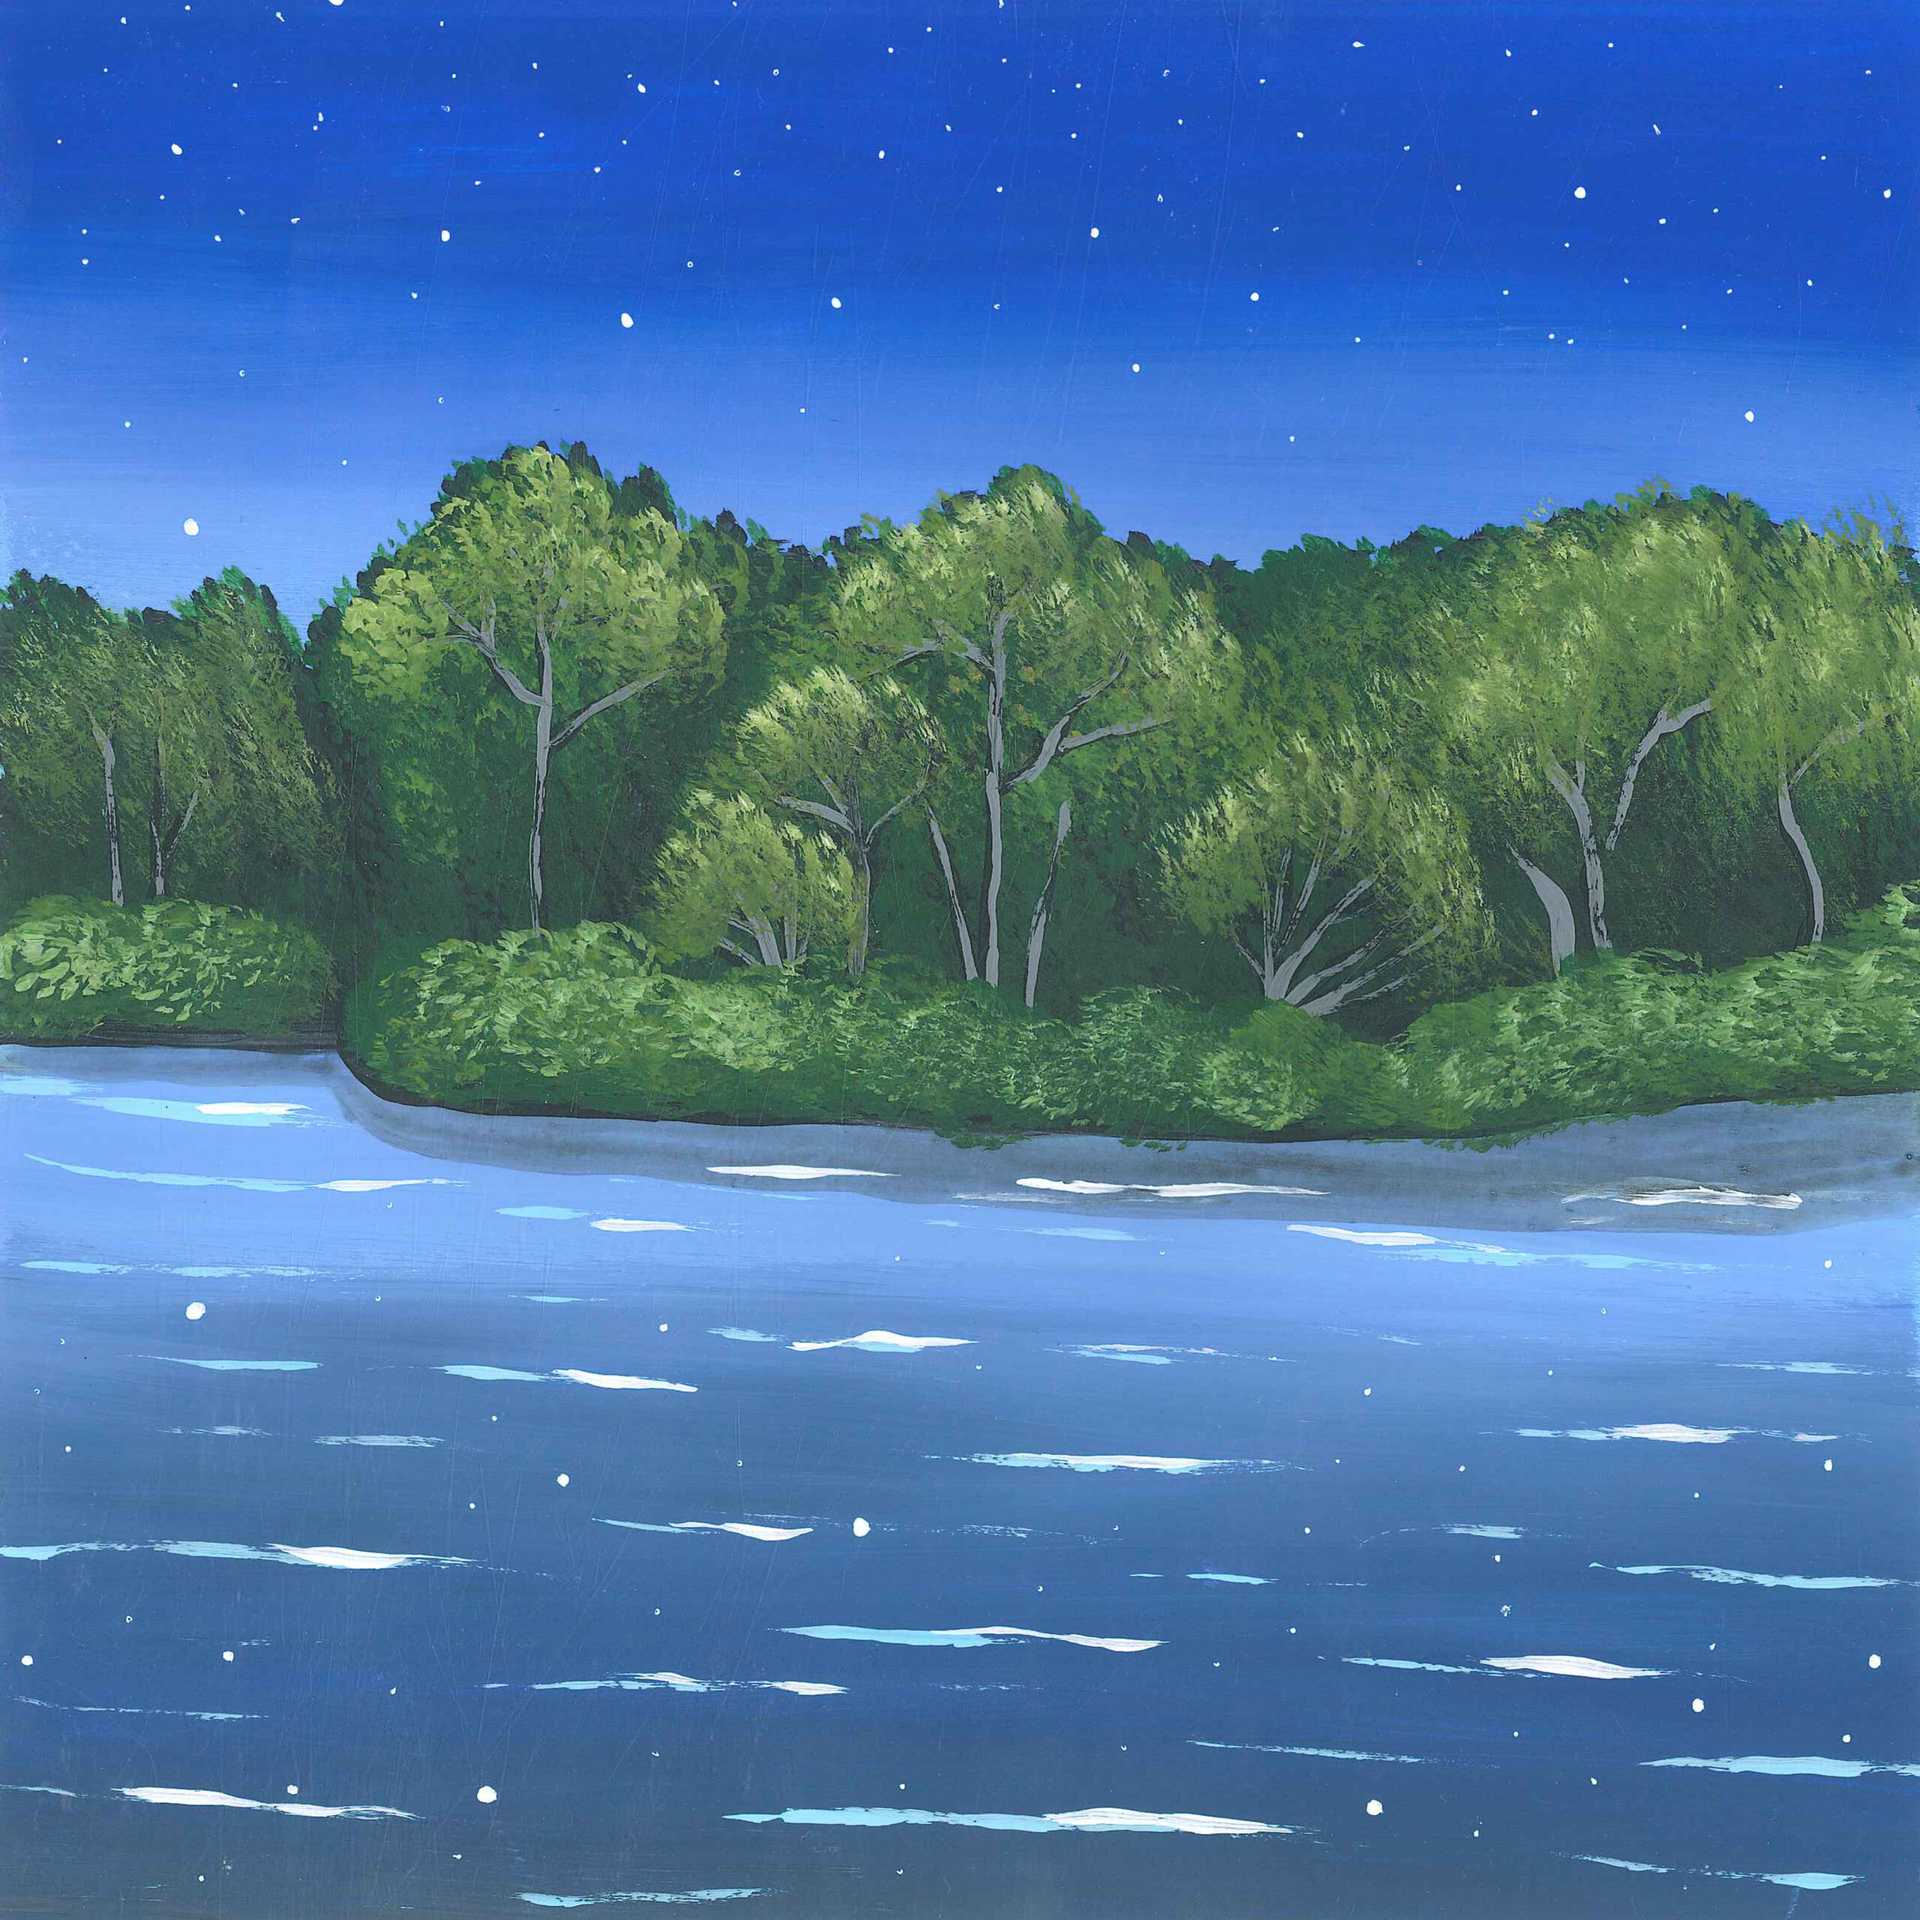 Night In The Amazon Rainforest - nature landscape painting - earth.fm